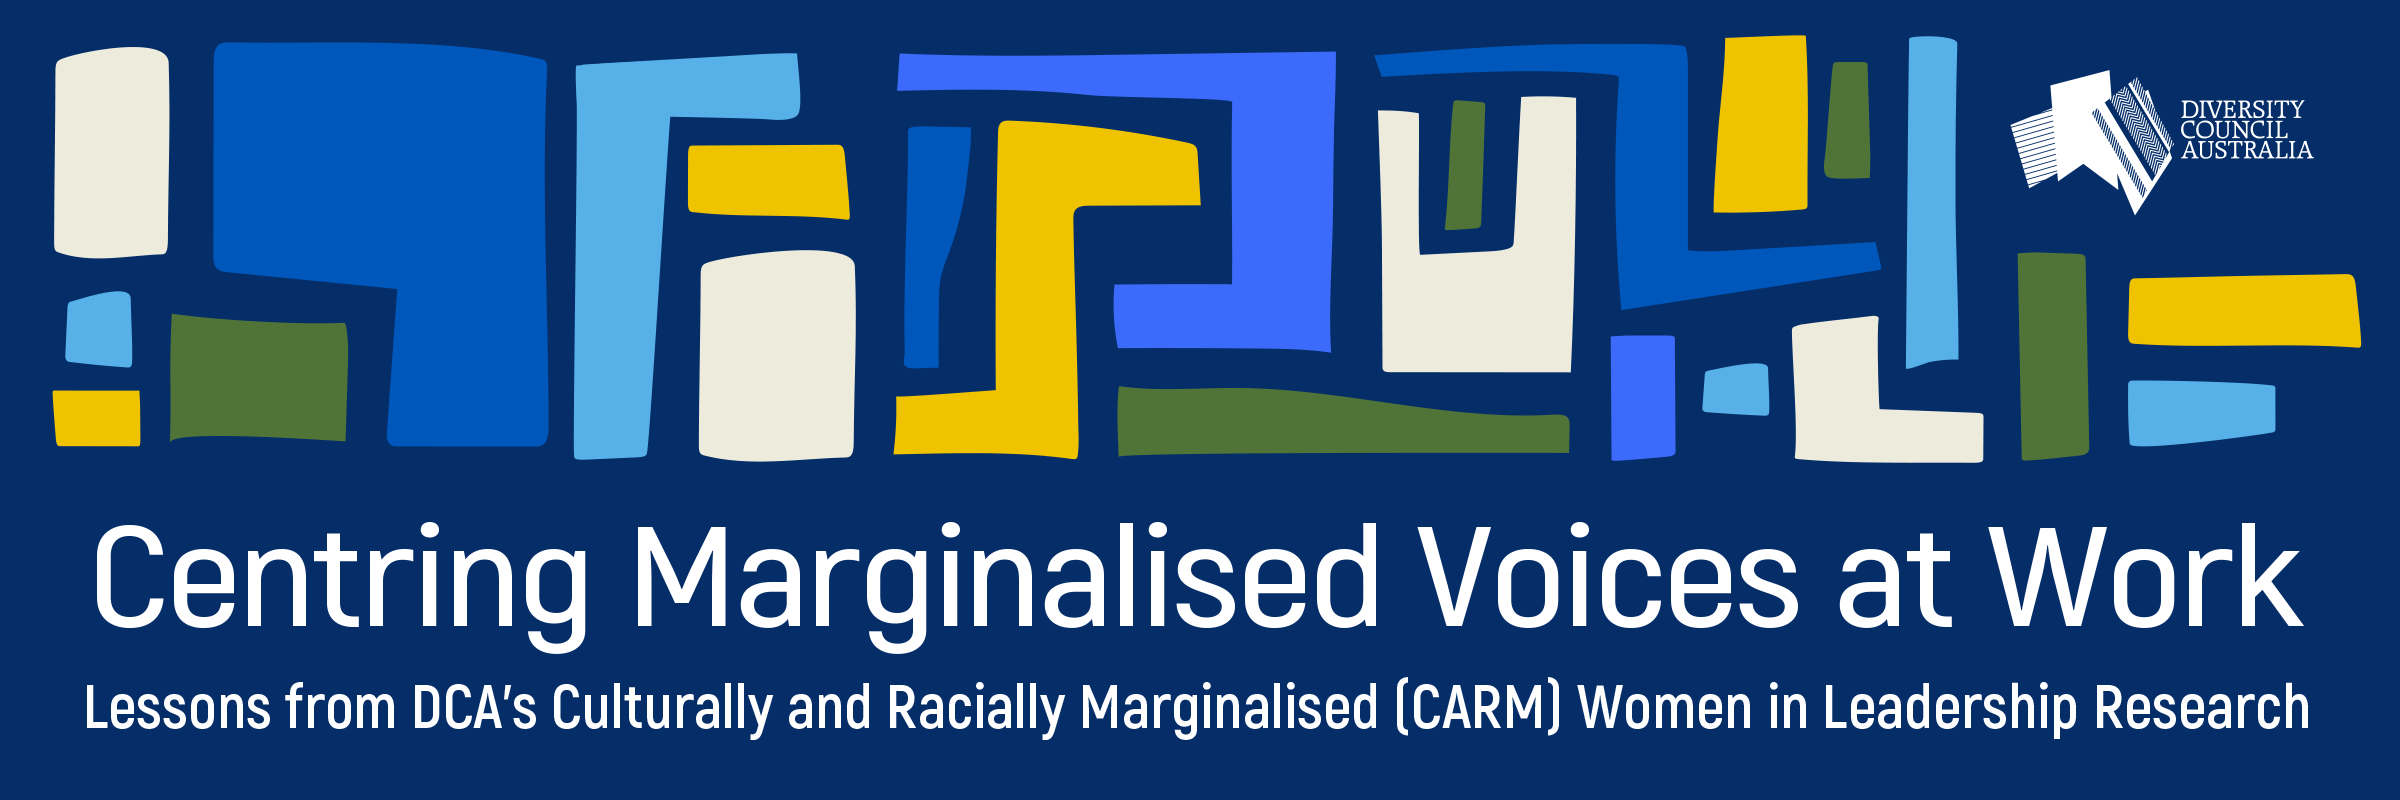 Banner for research launch with DCA's logo, colourful and uneven shapes that fit together like puzzle pieces. Underneath is the text centring marginalised voices at work. Lessons from DCA's culturally and racially marginalised (CARM) women in leadership research.